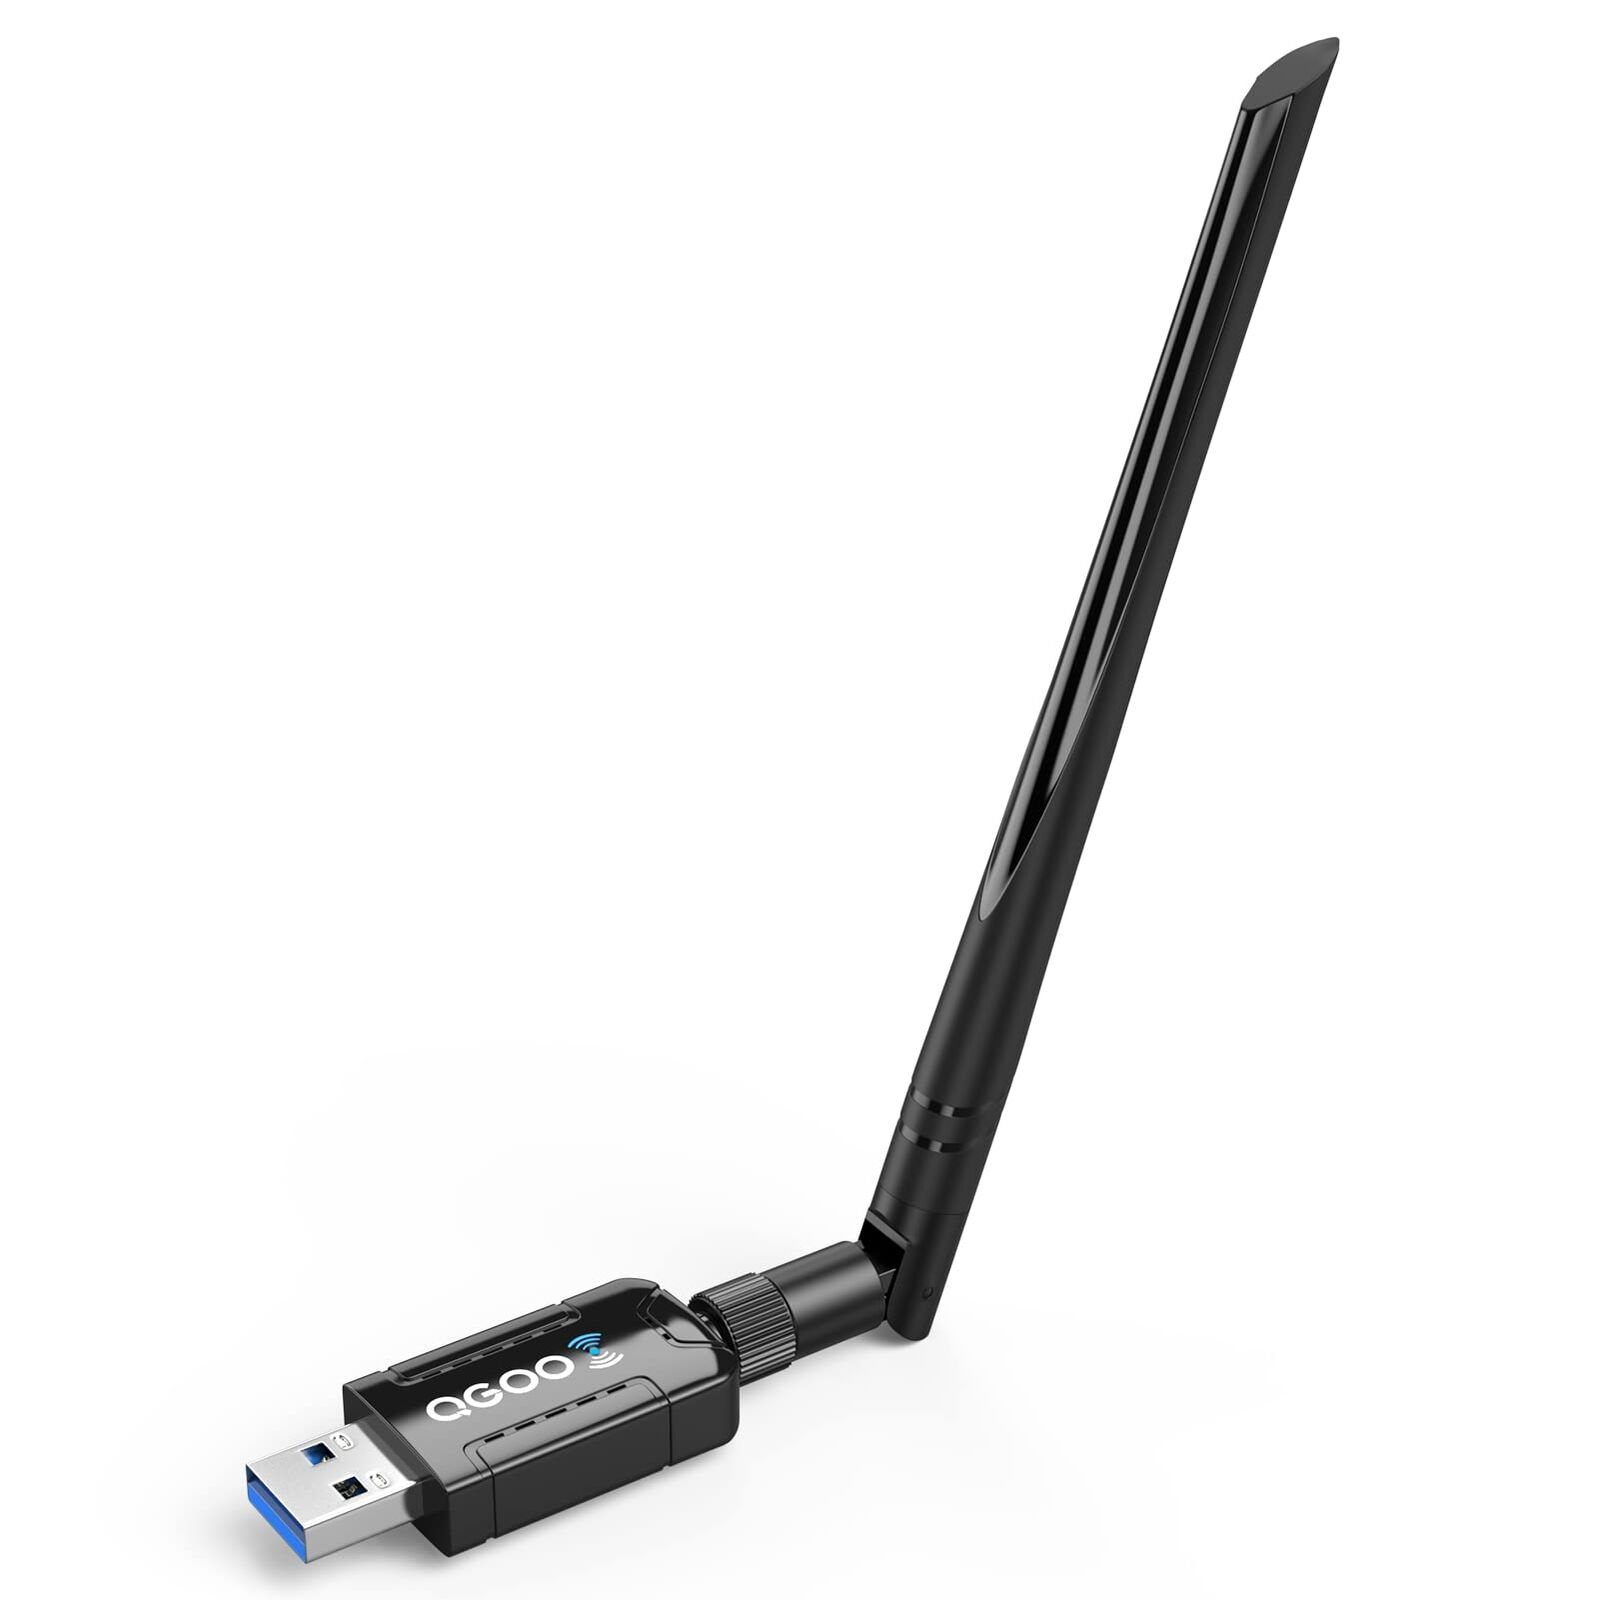 WiFi Adapter for PC, QGOO 1200Mbps USB 3.0 Wireless Network WiFi Dongle with 5dB